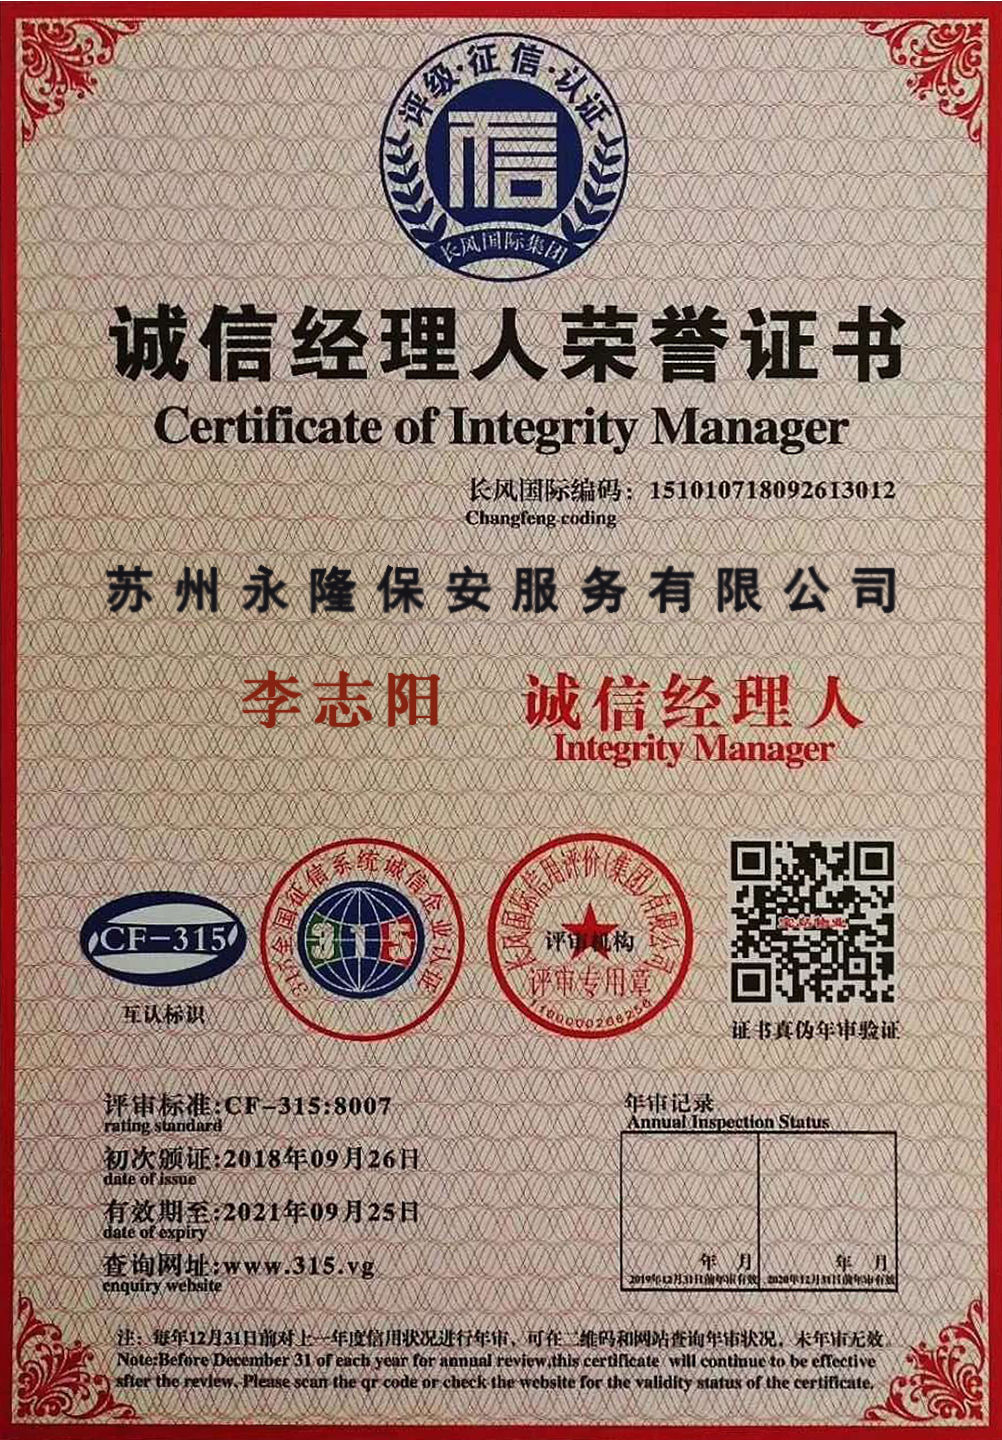 Certificate of Integrity Manager